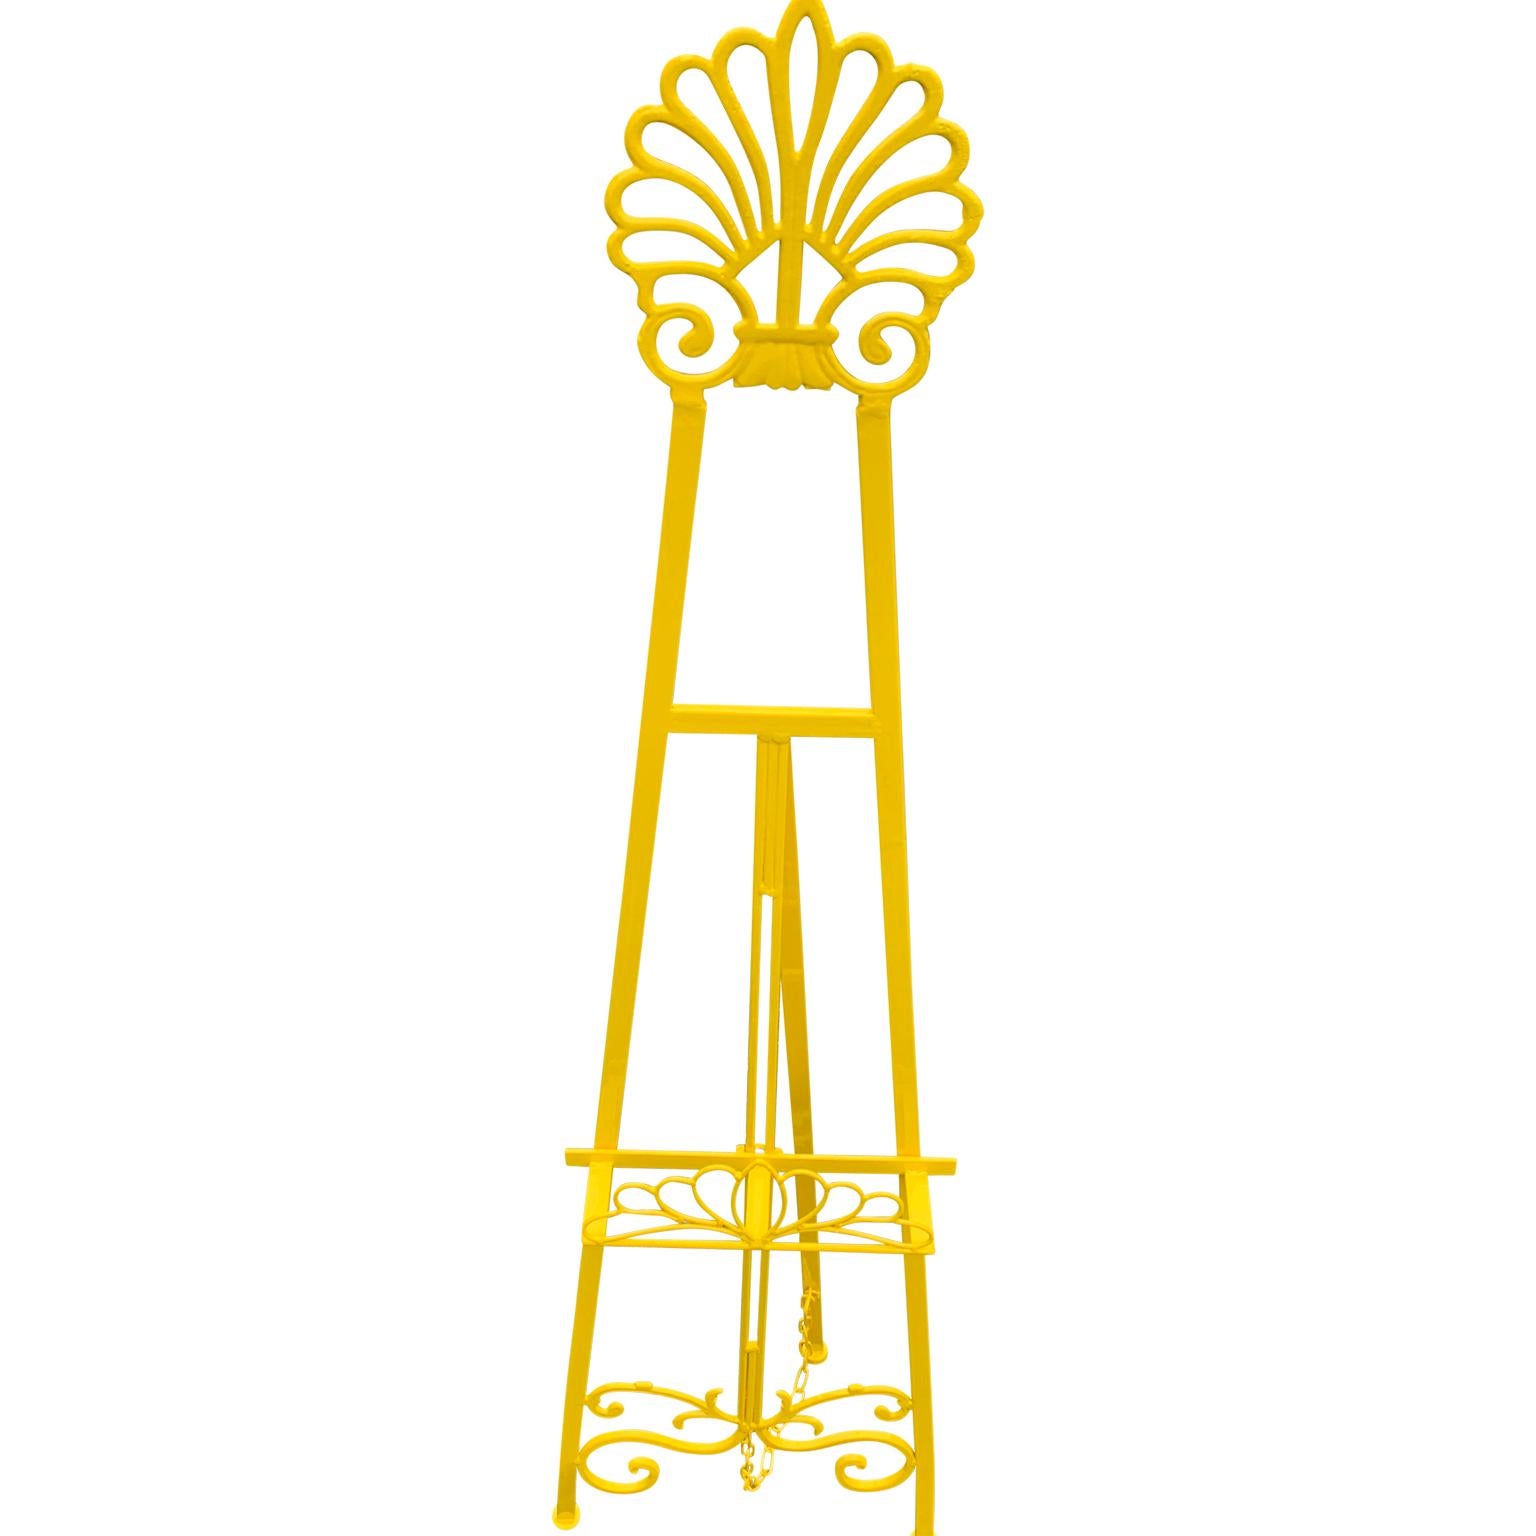 20th Century Mid-Century Metal Easel, Newly Powder-Coated In Bright Sunshine Yellow